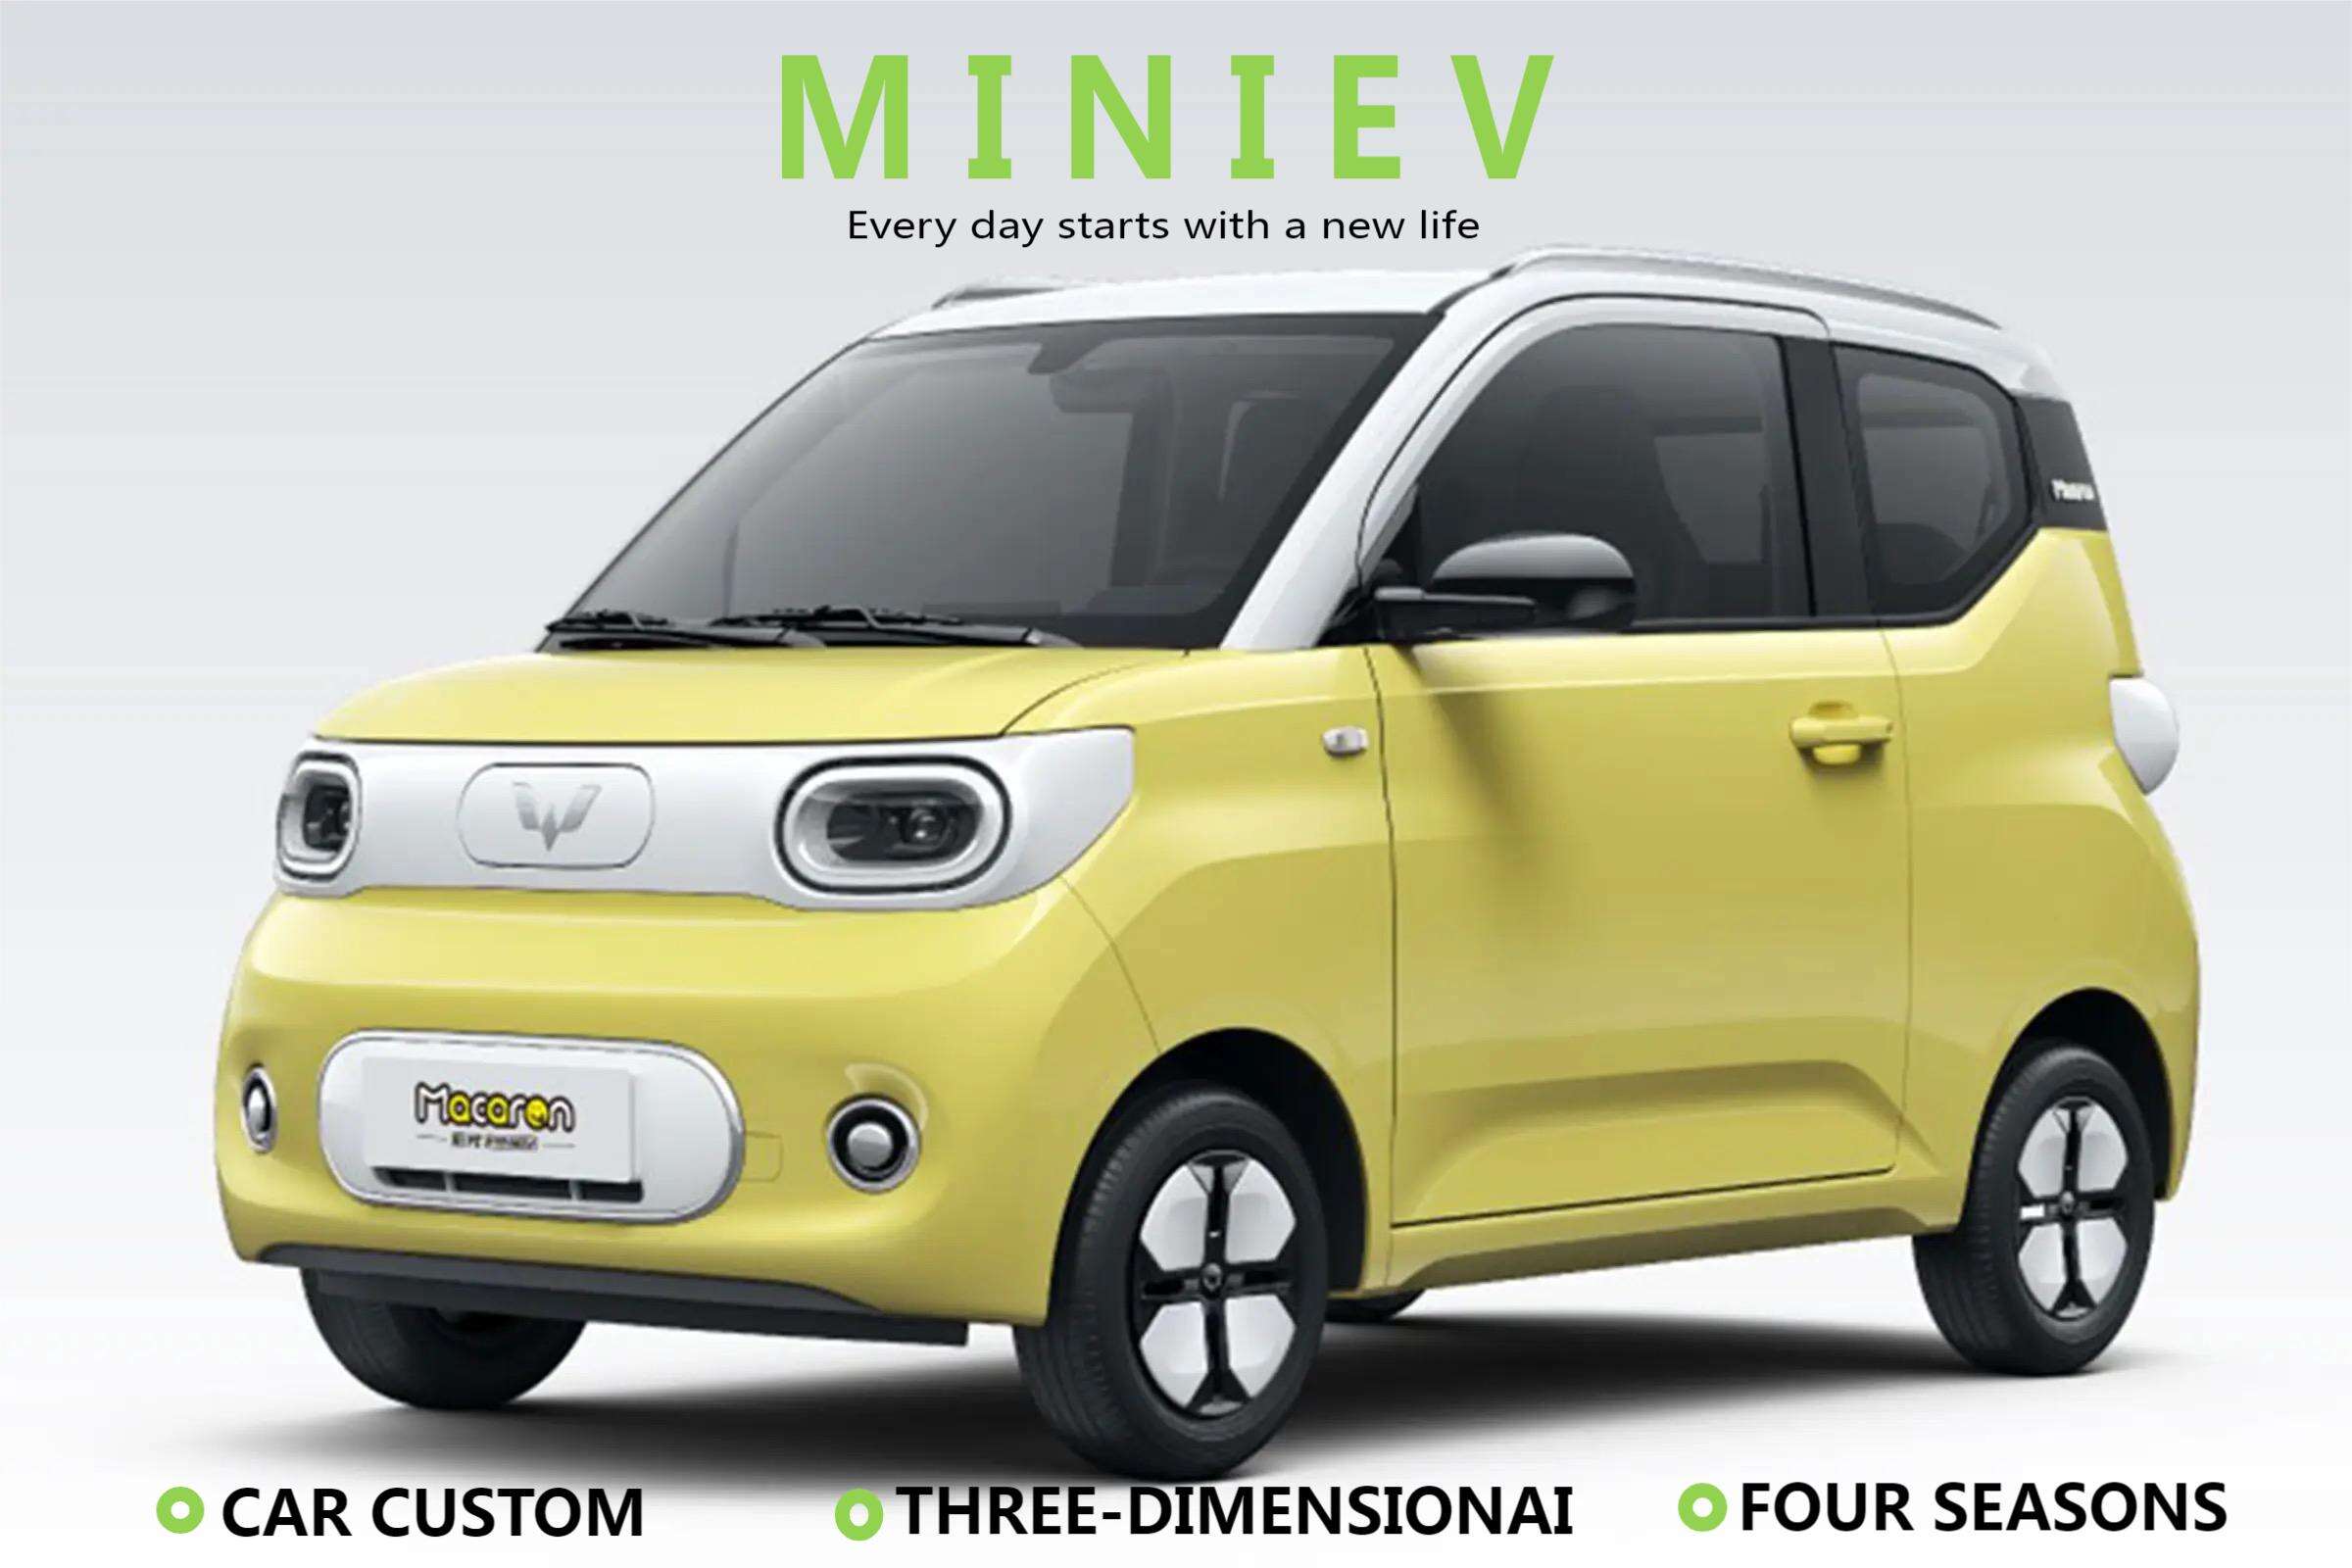 In stock Wuling Hongguang Mini ev Smart mini Electric Car Manufacturer new energy  Electric Car with Low Price for Sale details